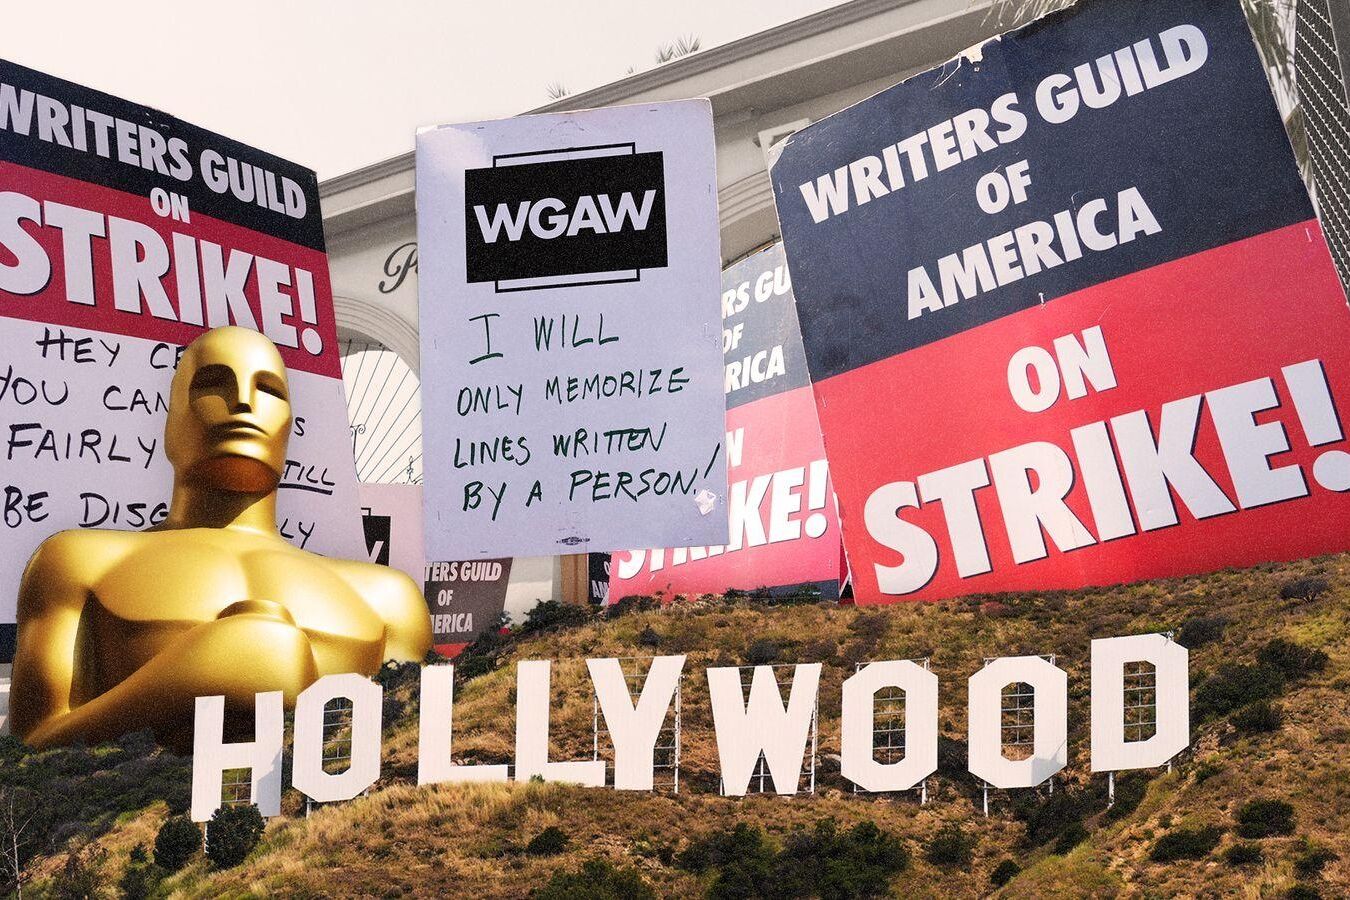 Actors on strike: the Hollywood cartel